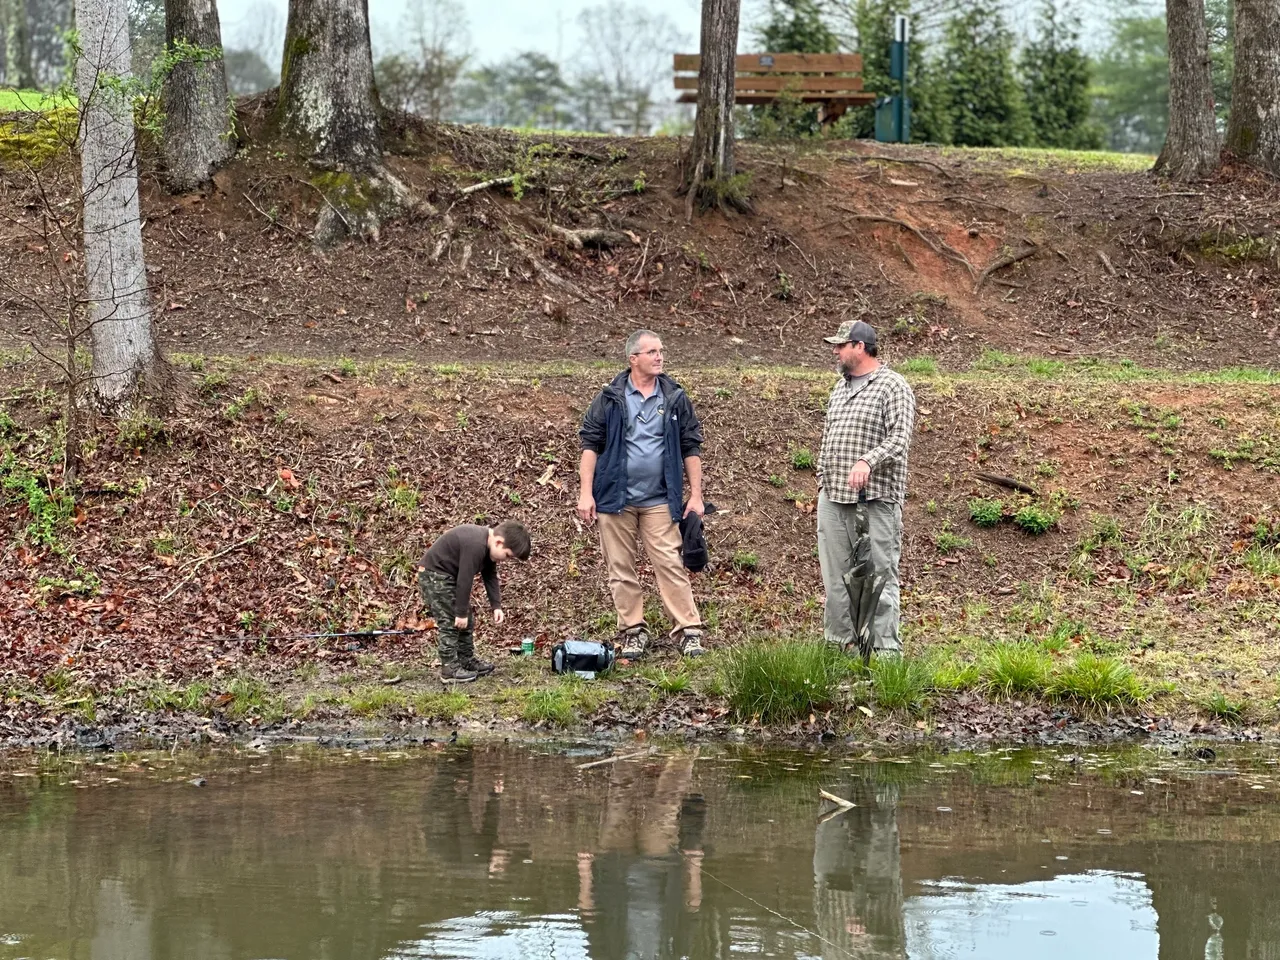 Two men fishing in a pond with another man standing next to them.